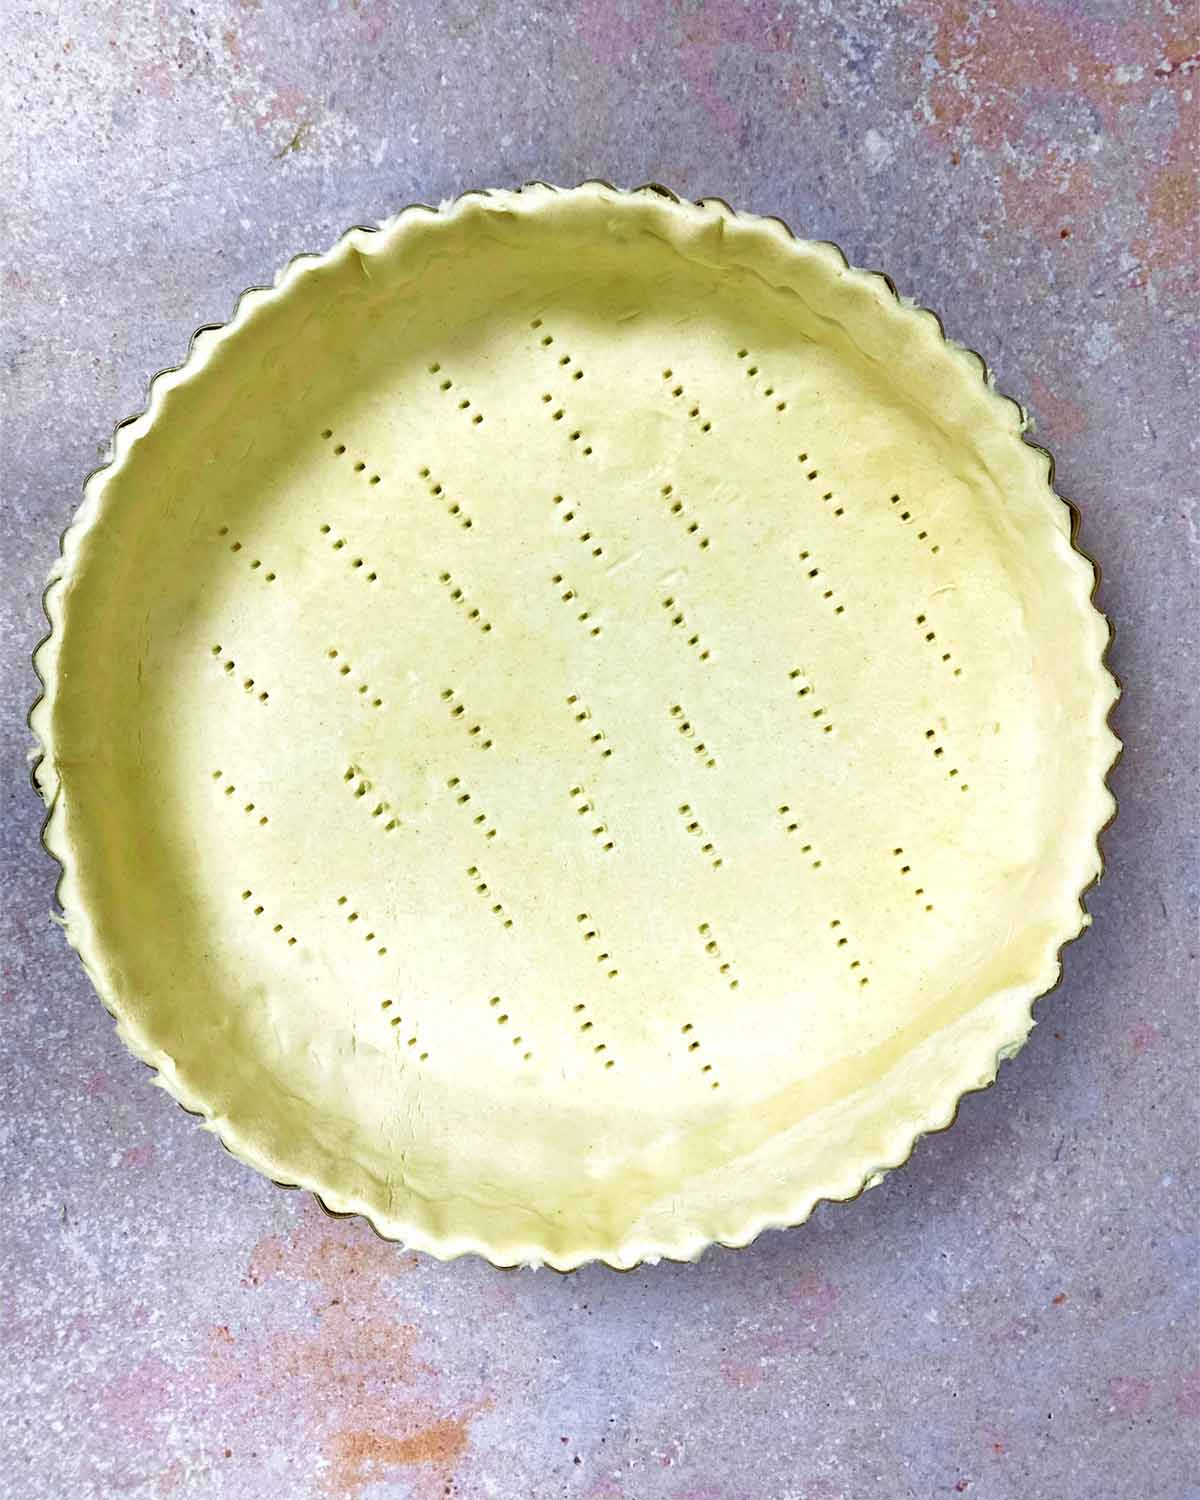 Trimmed pastry in a pie tin with the bottom pricked with holes.